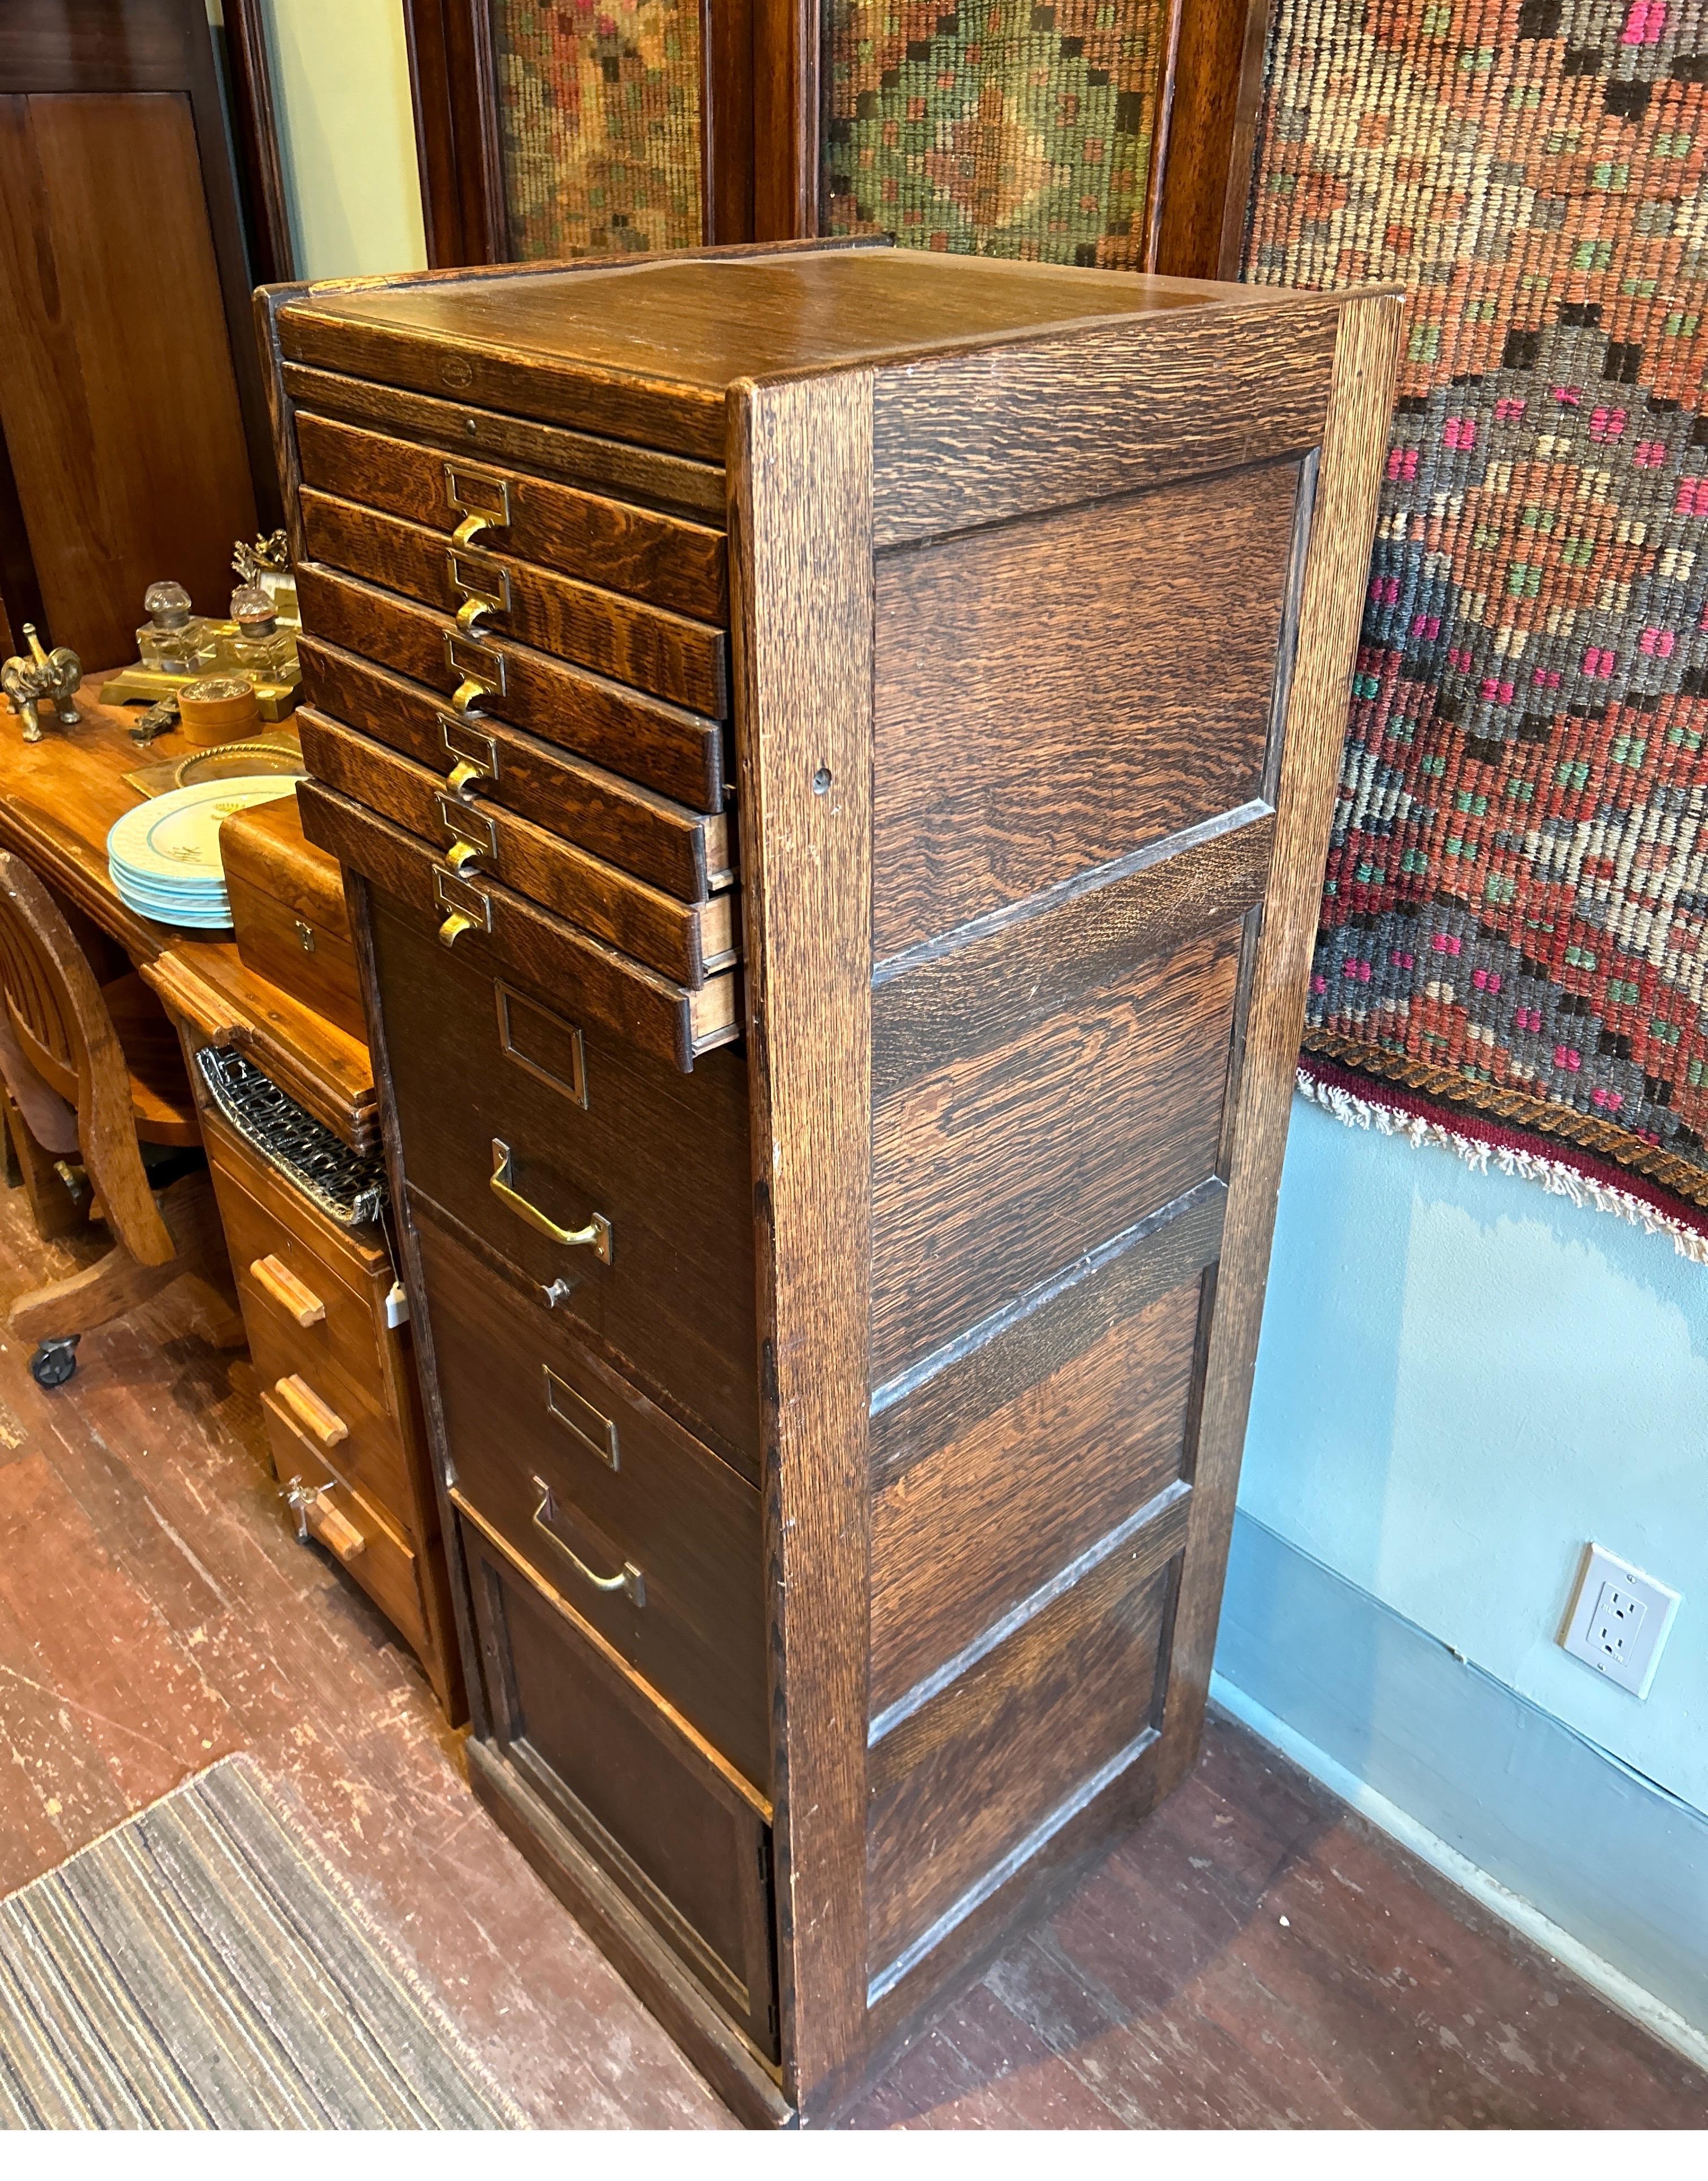 Solid oak Arts & Crafts Barrister cabinet with a unique combination of narrow drawers, larger filings drawers and a cabinet. Excellent patina throughout with original brass pulls and hardware. Nice panel work on the sides. Old world craftsmanship